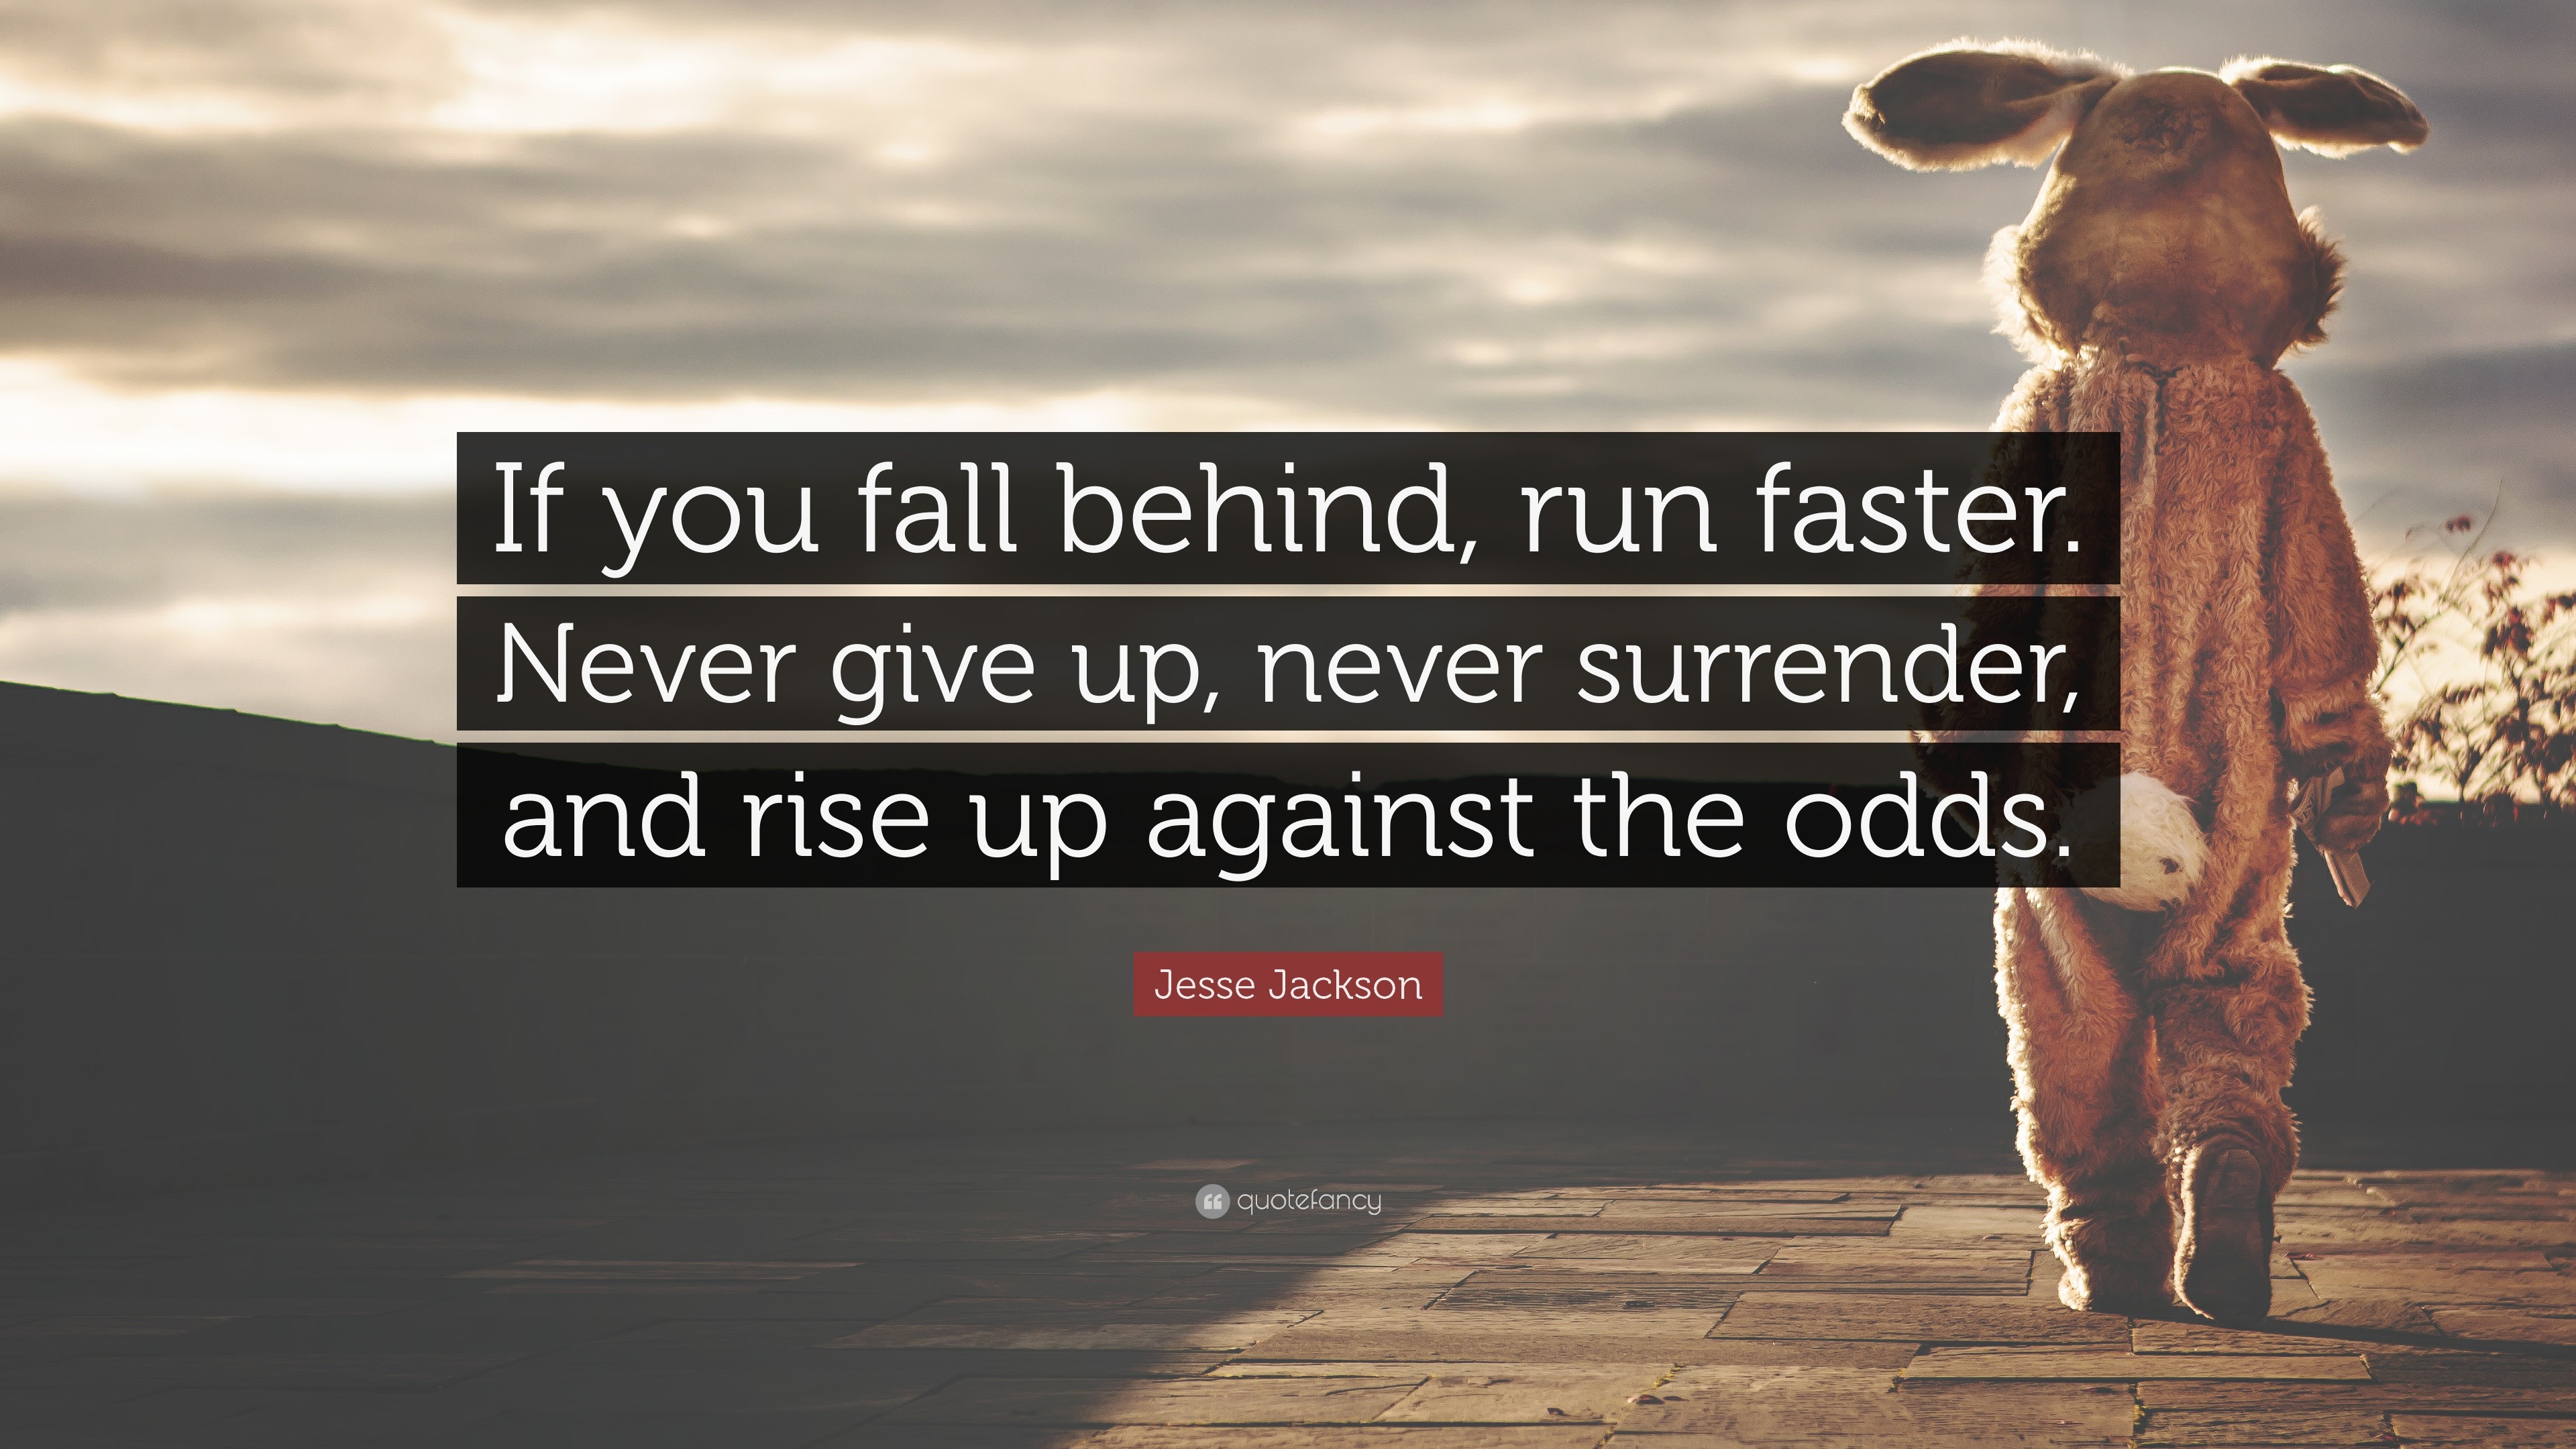 Jesse Jackson Quote: “If you fall behind, run faster. Never give up